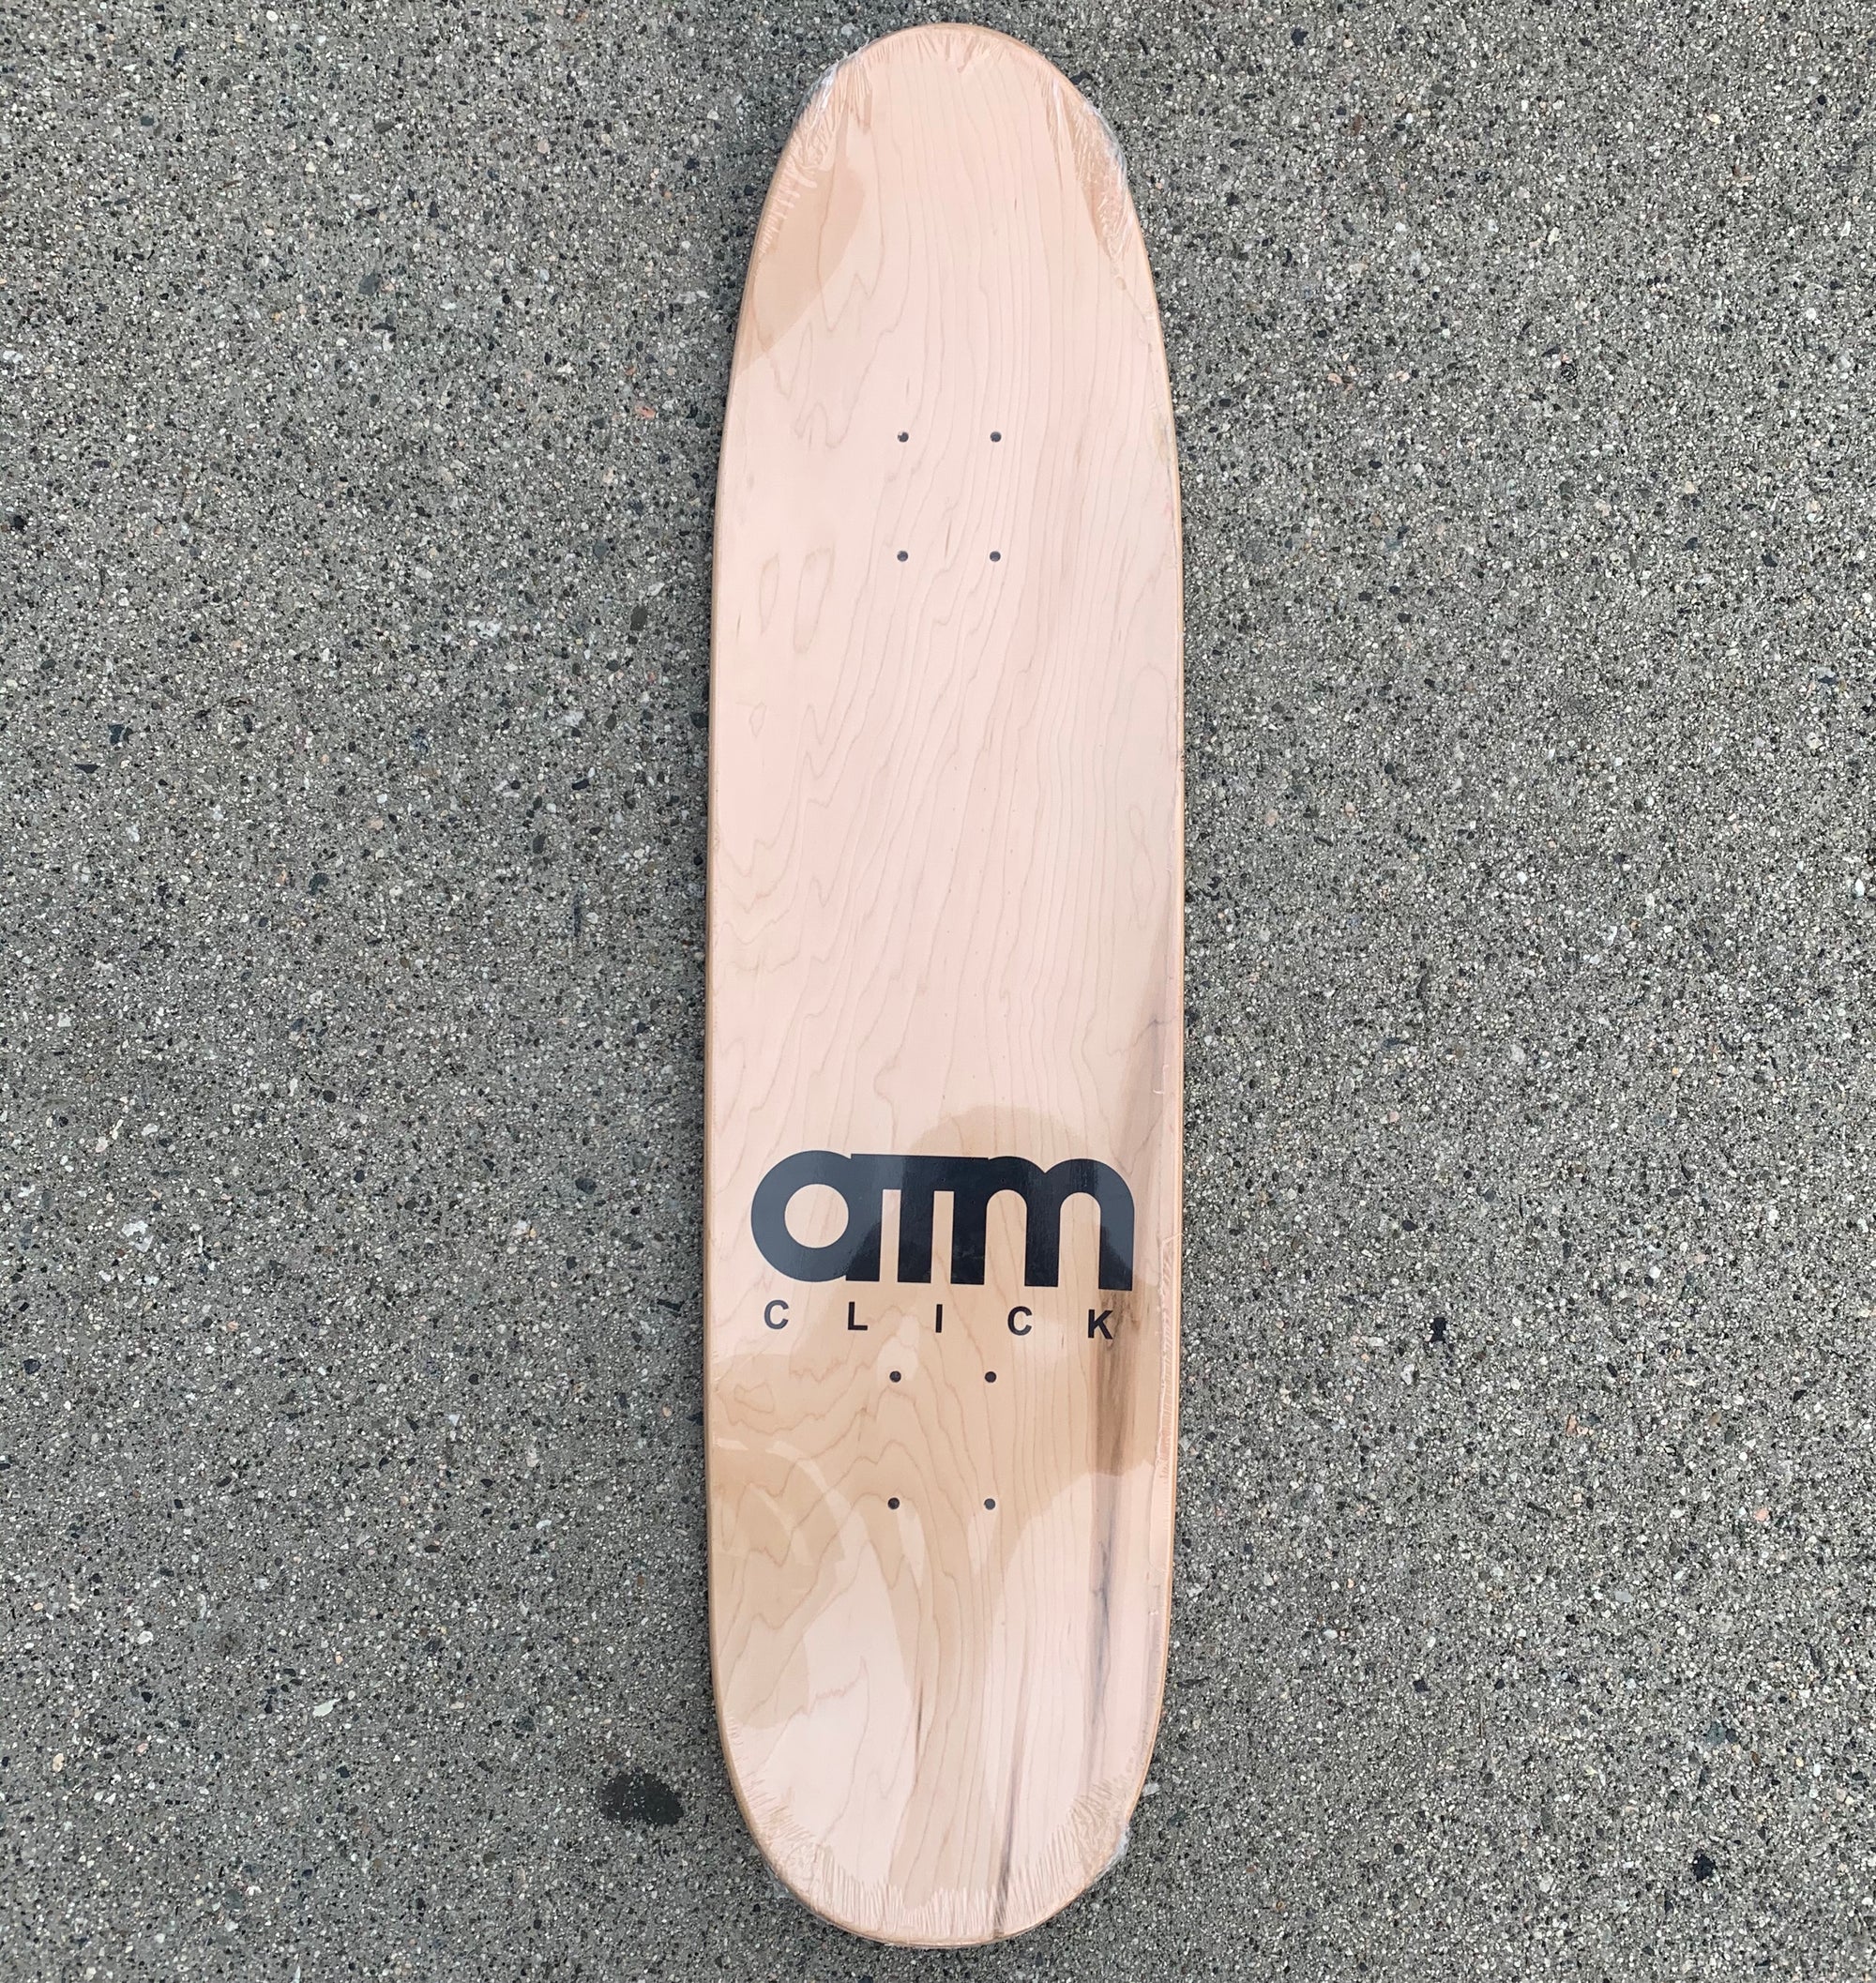 ATM MARY 20 YEARS DECK (8.375&quot; X 31.75&quot;) - The Drive Skateshop